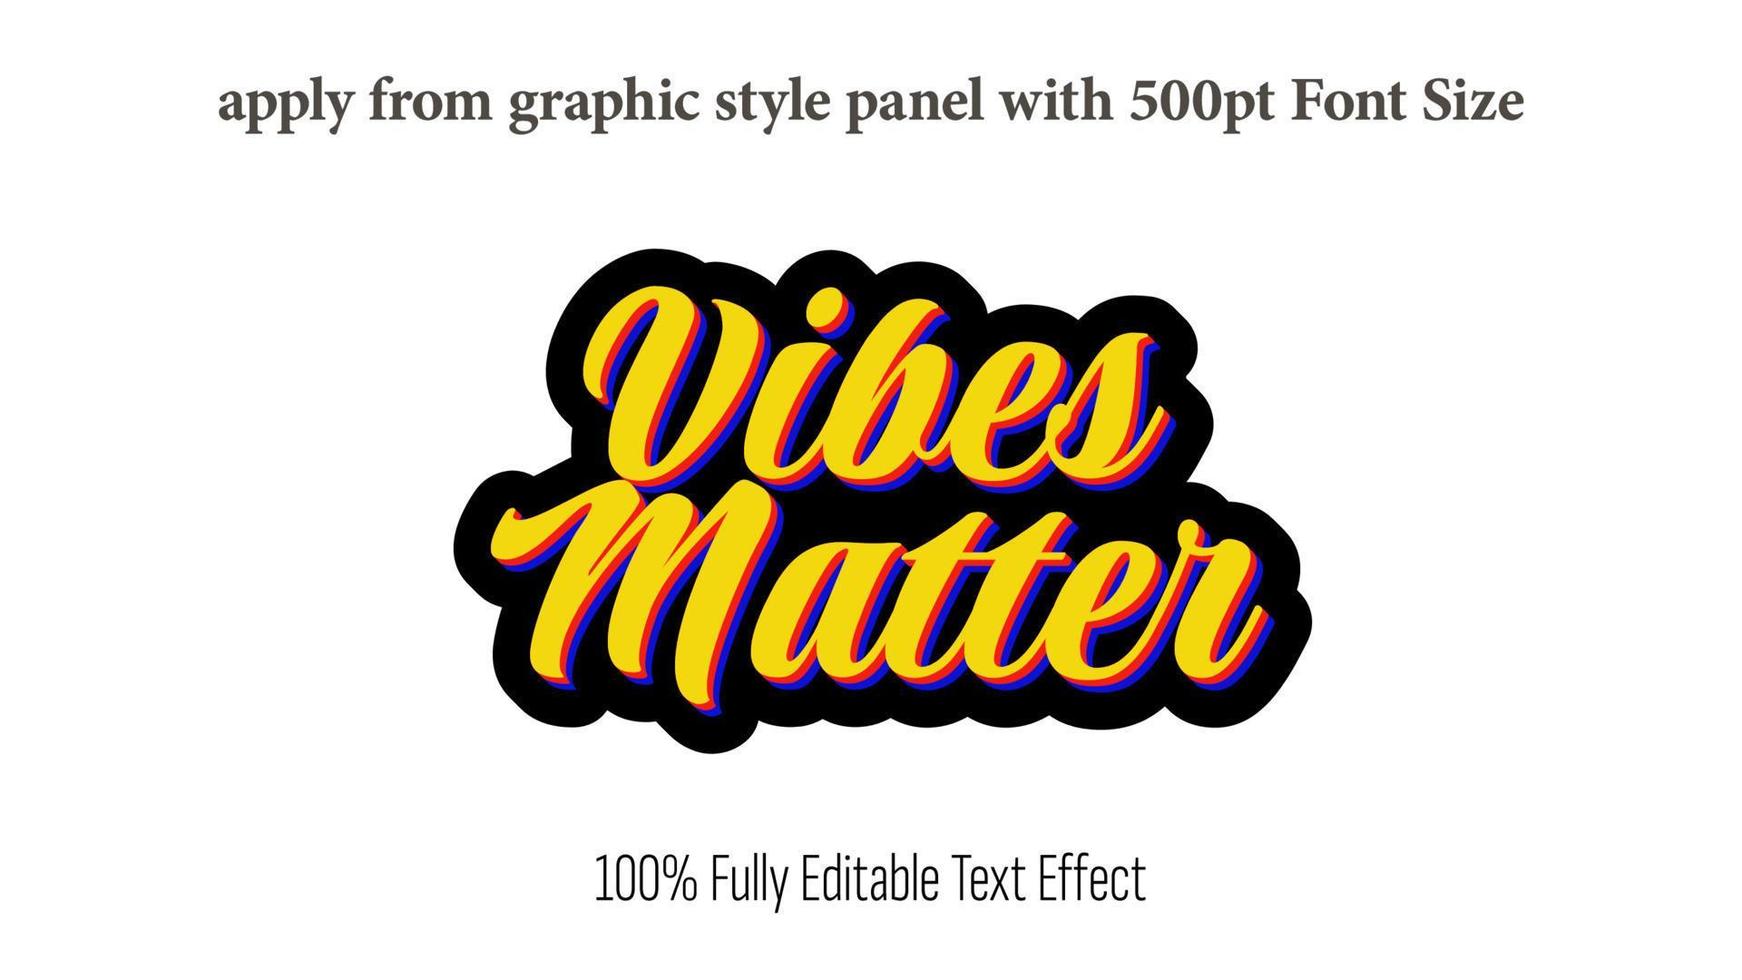 text effect - Graphic Style vector